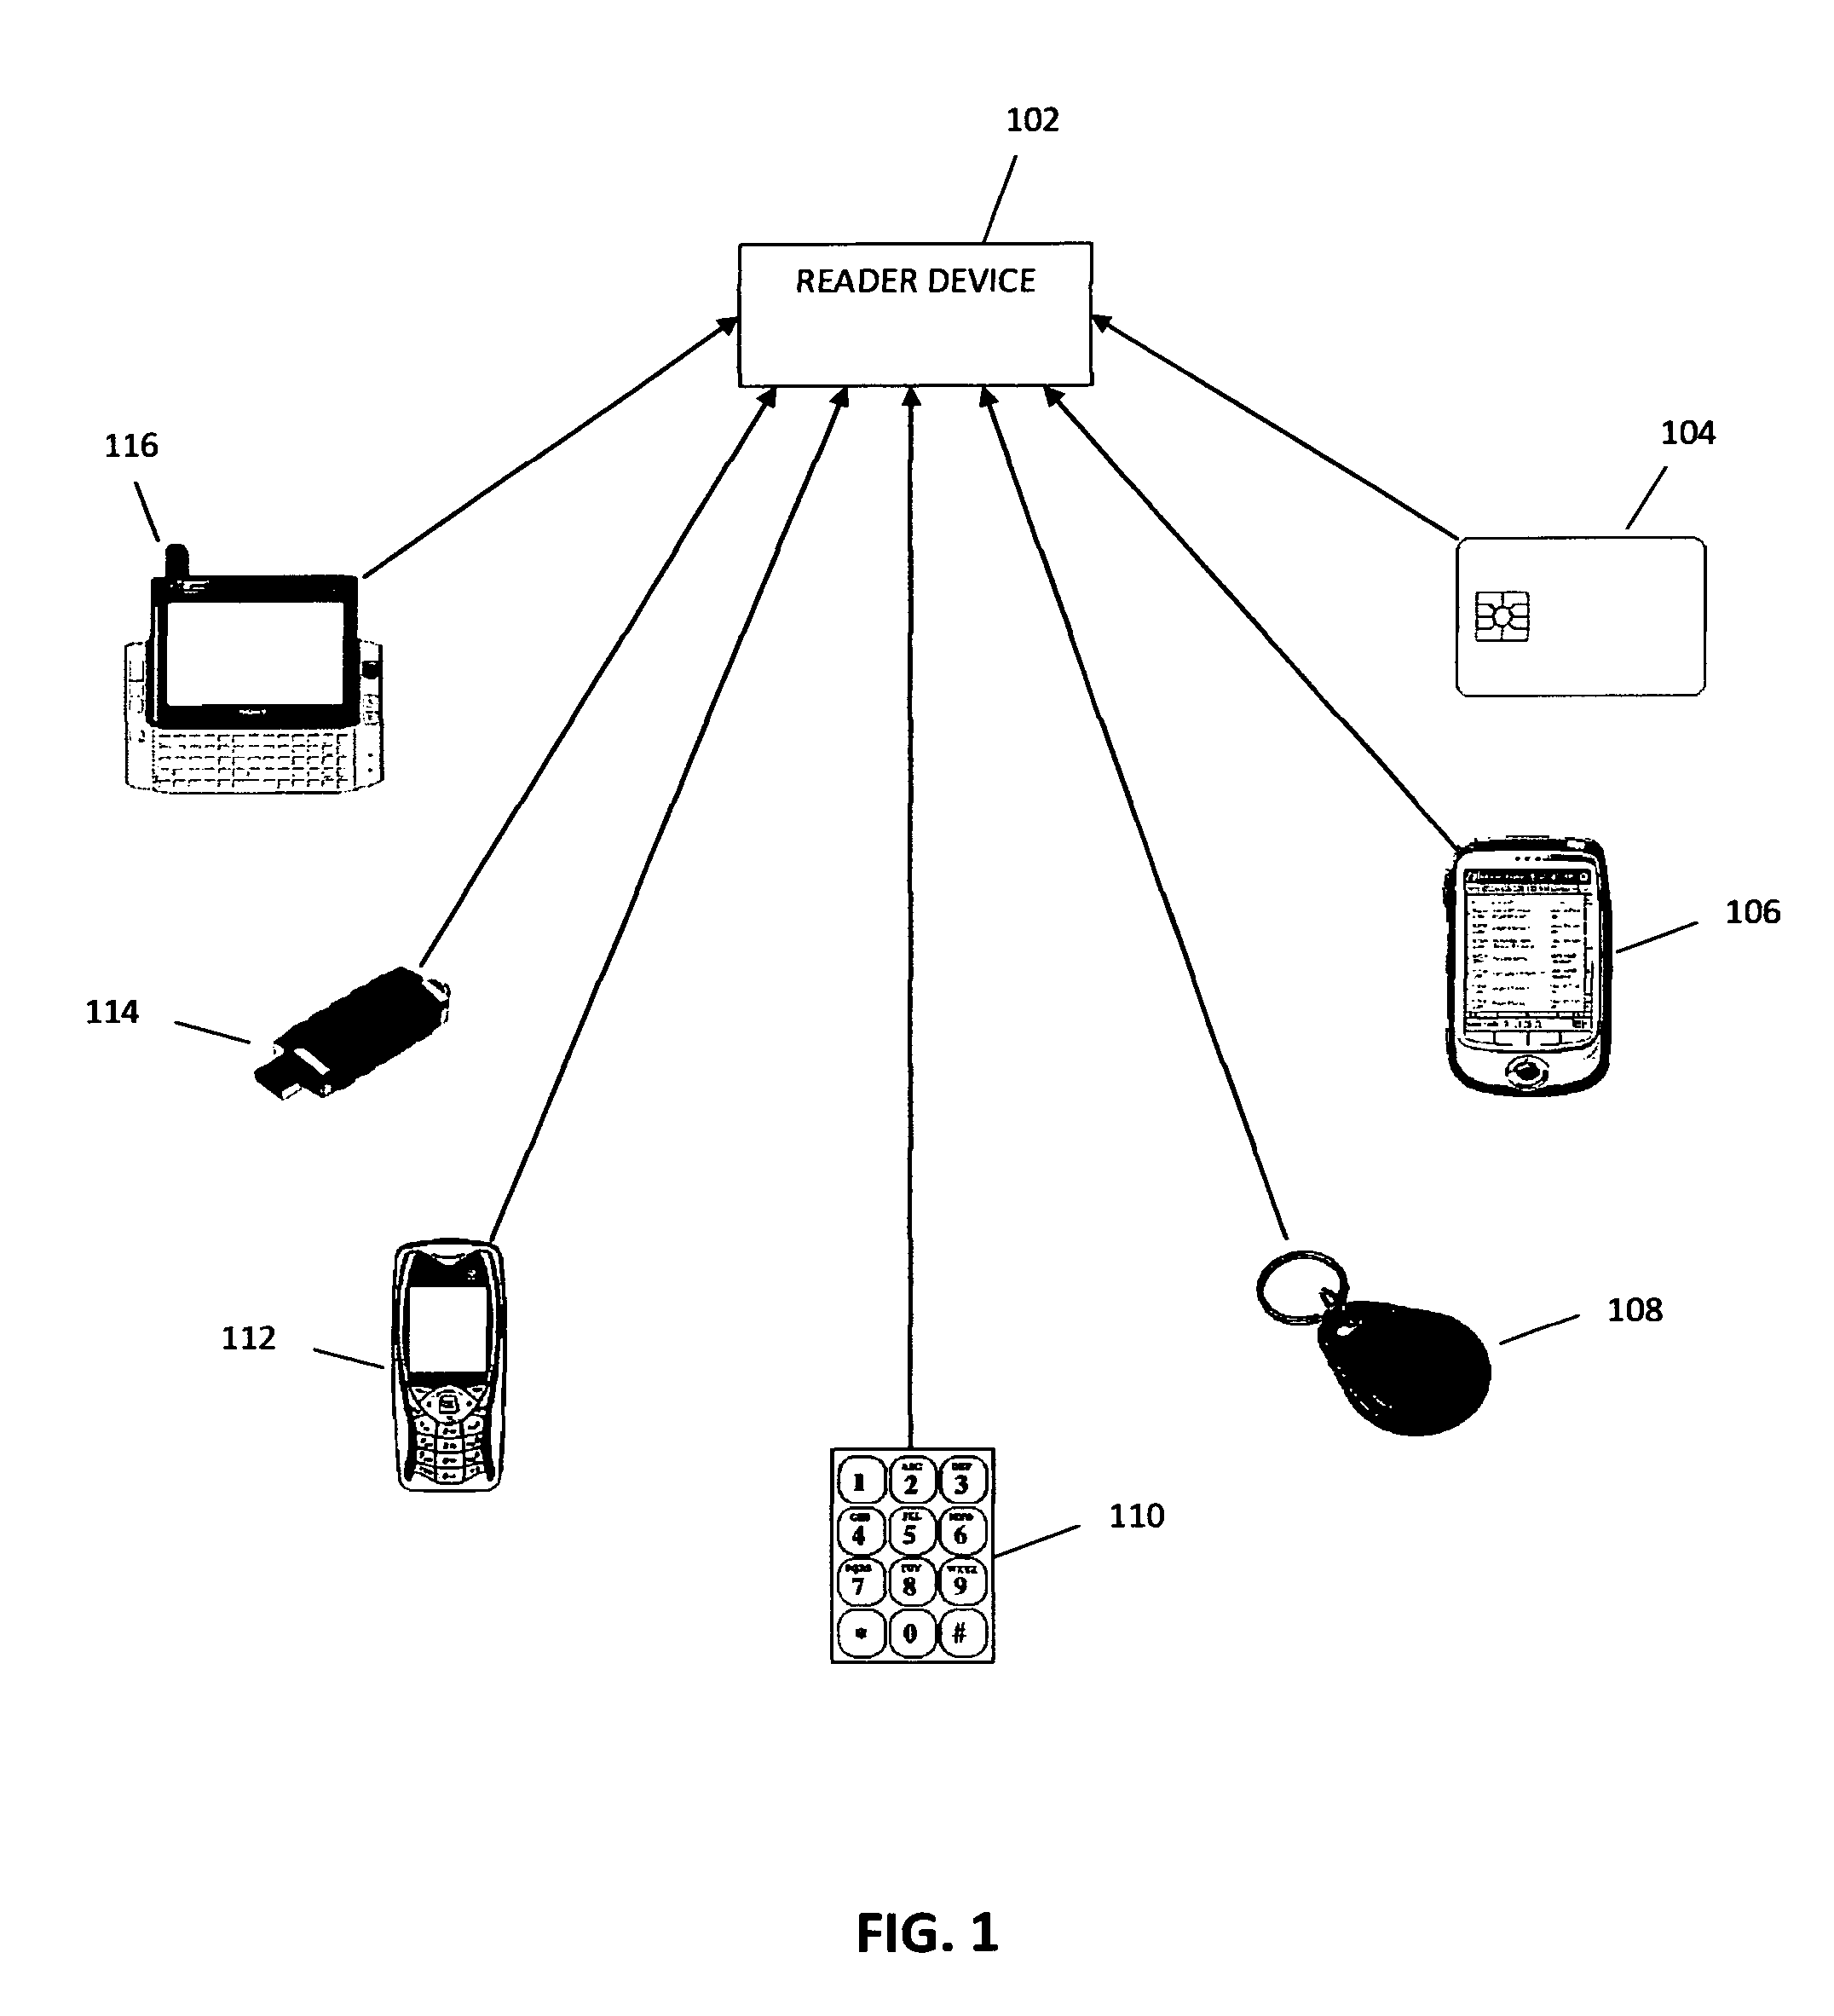 Method to provide authentication using a universal identifier